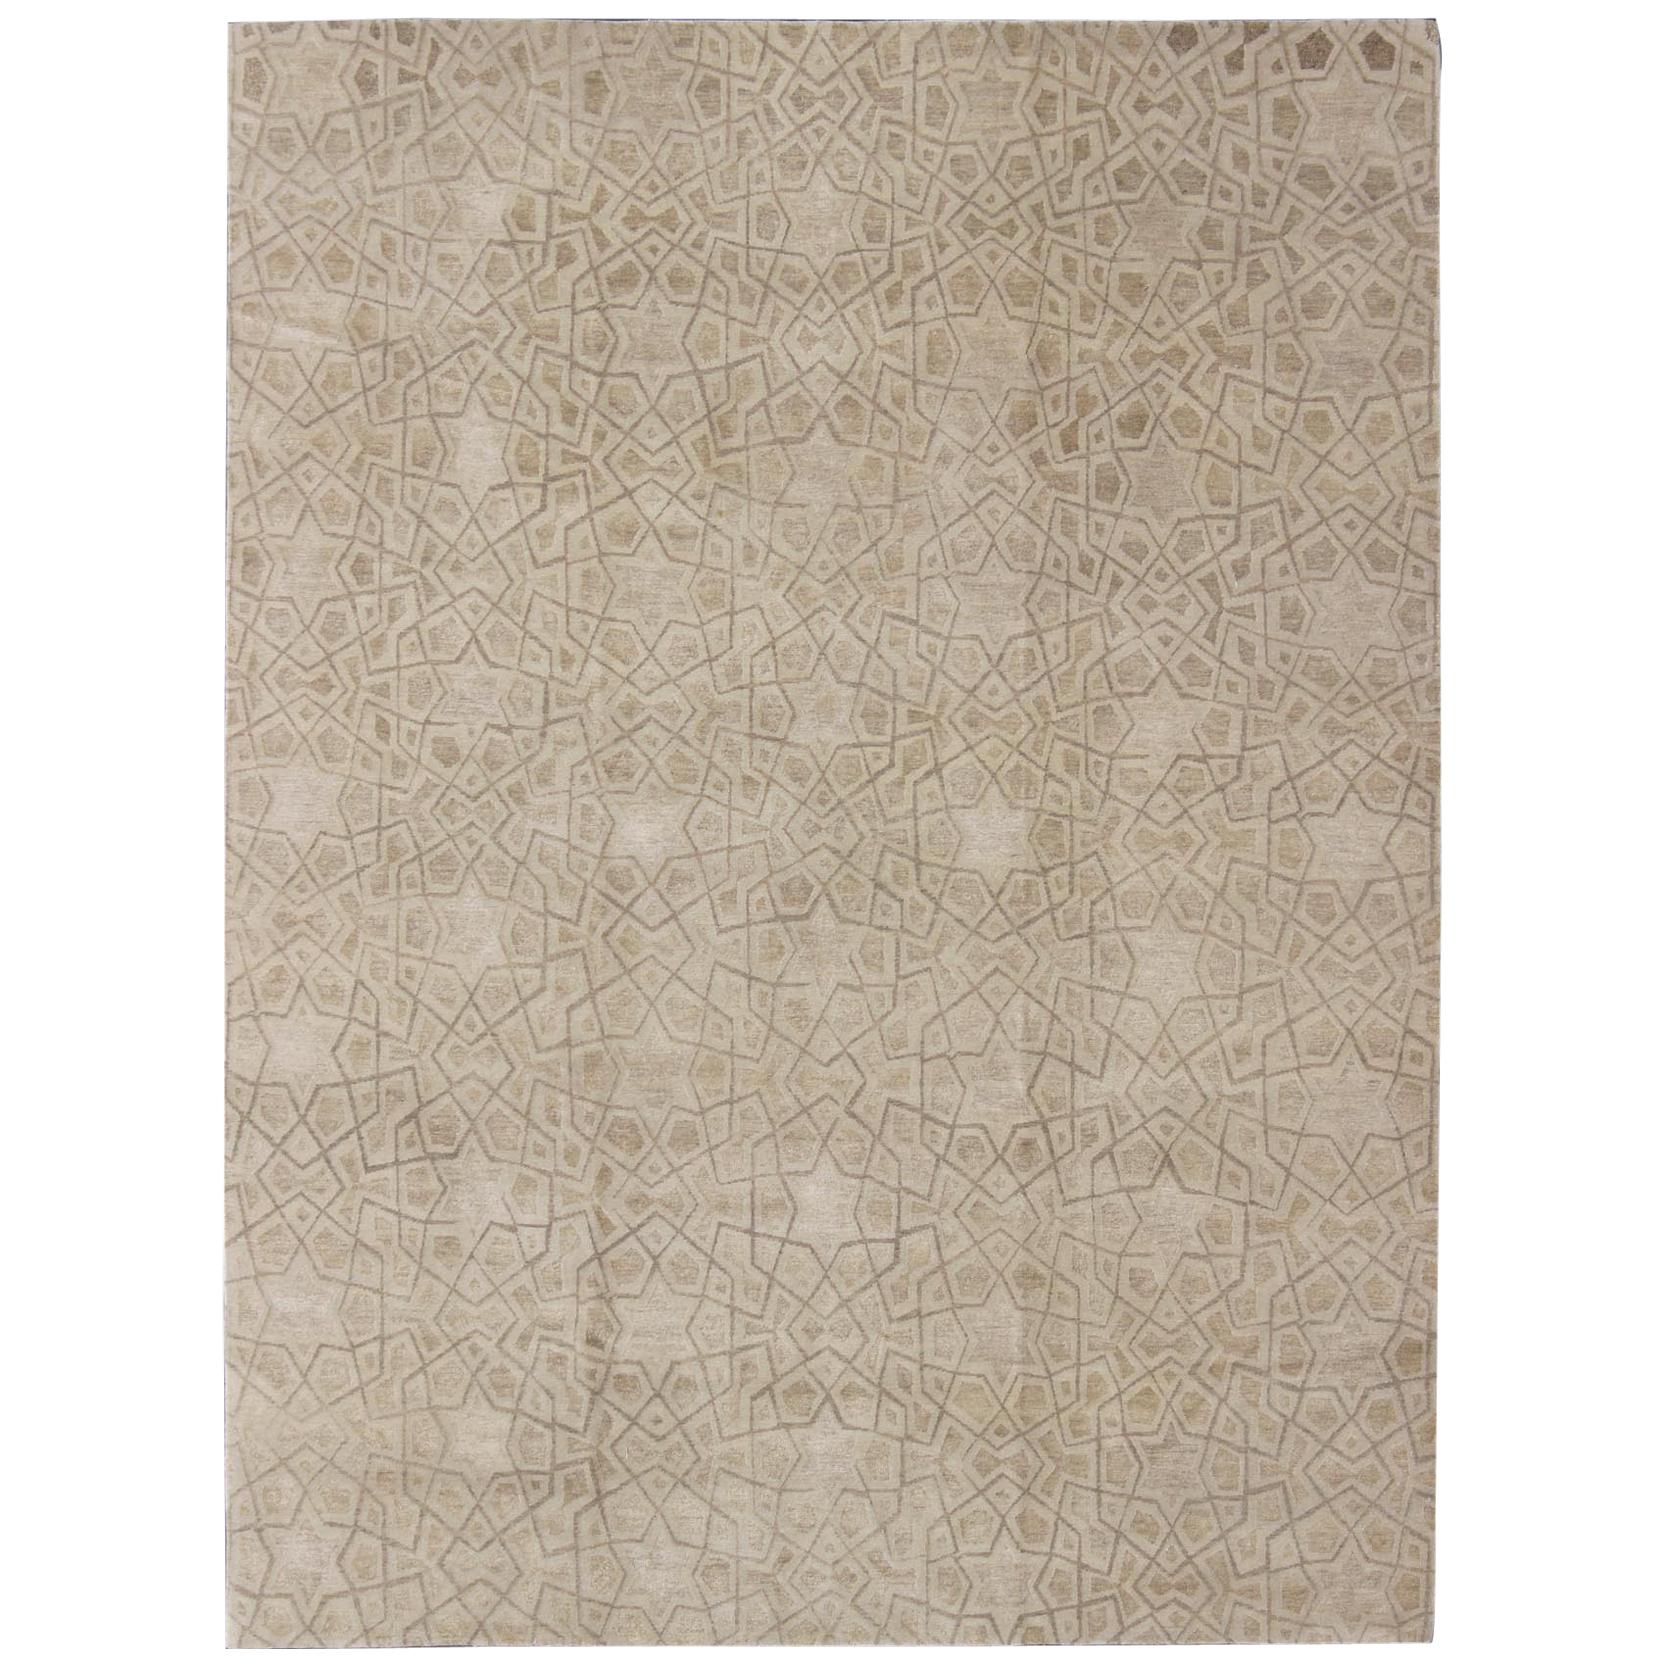 Wool and Silk Modern Design Tibetan Rug from Nepal in Neutrals and Earth Tones